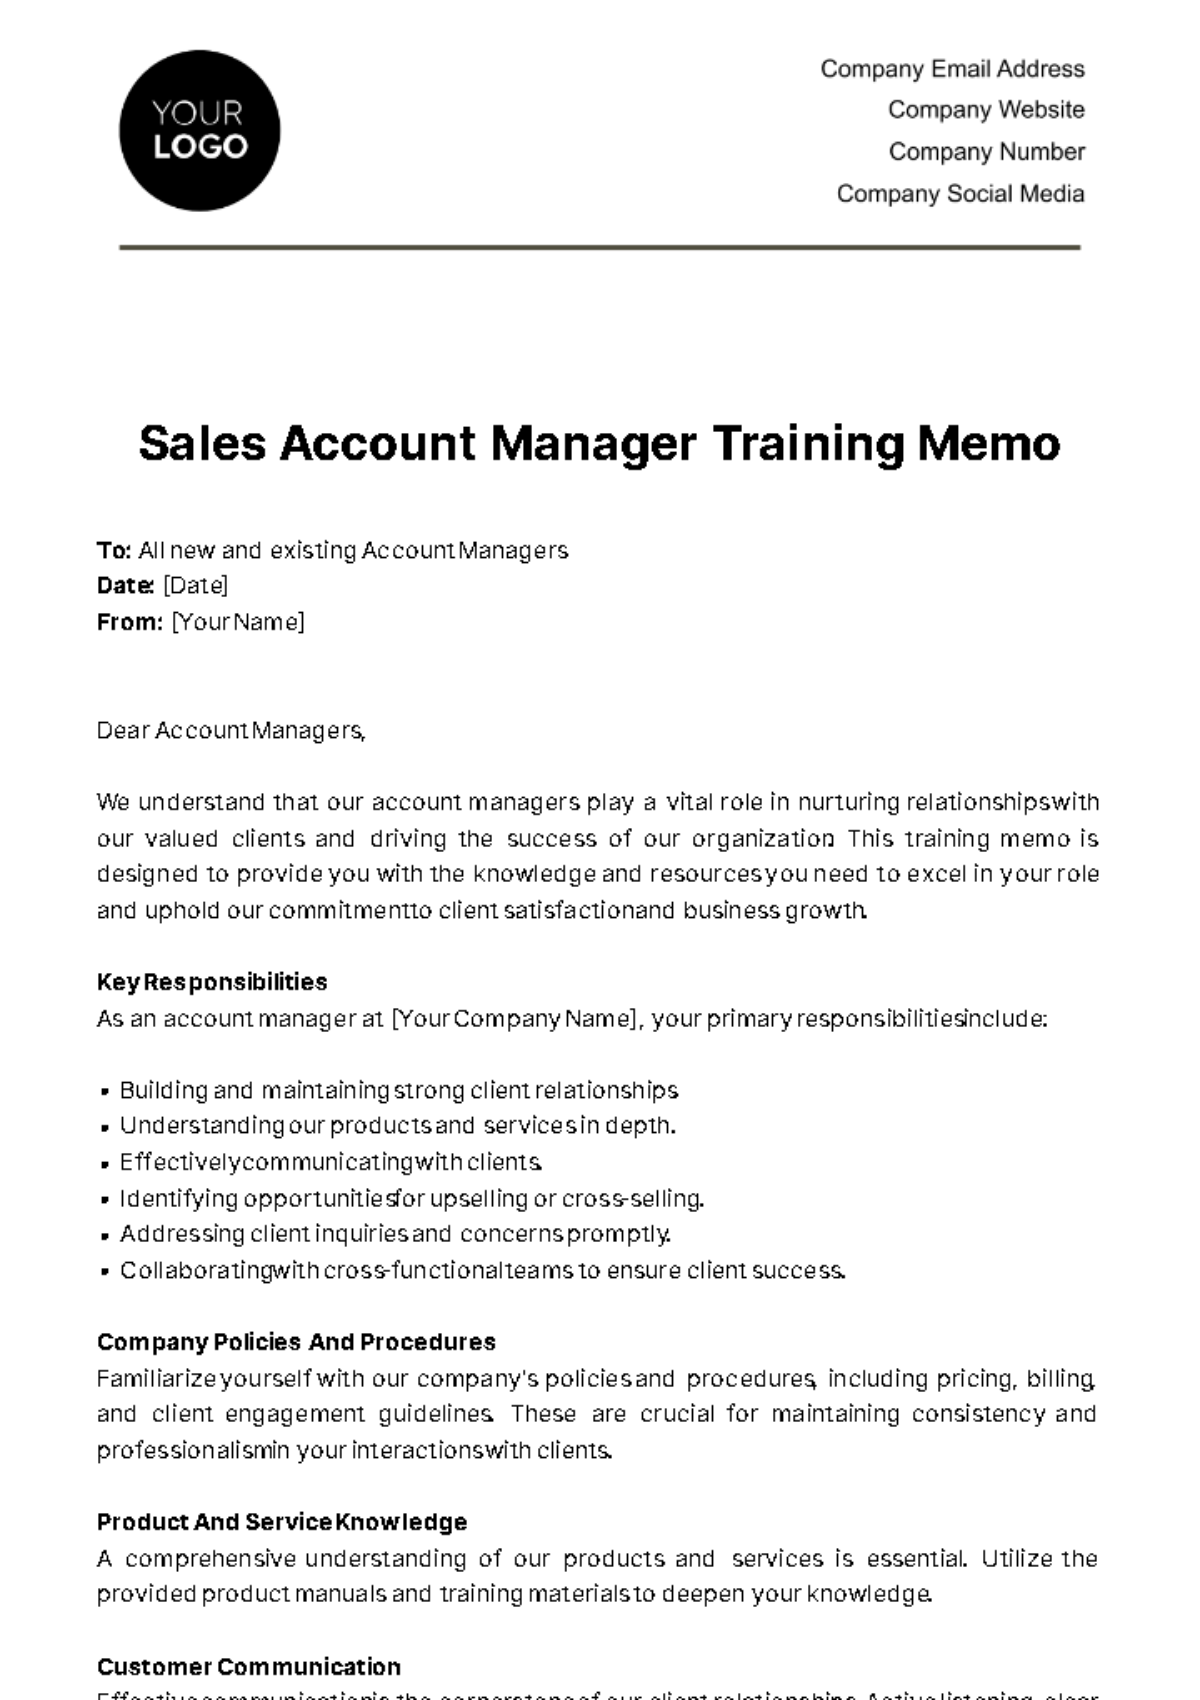 Free Sales Account Manager Training Memo Template